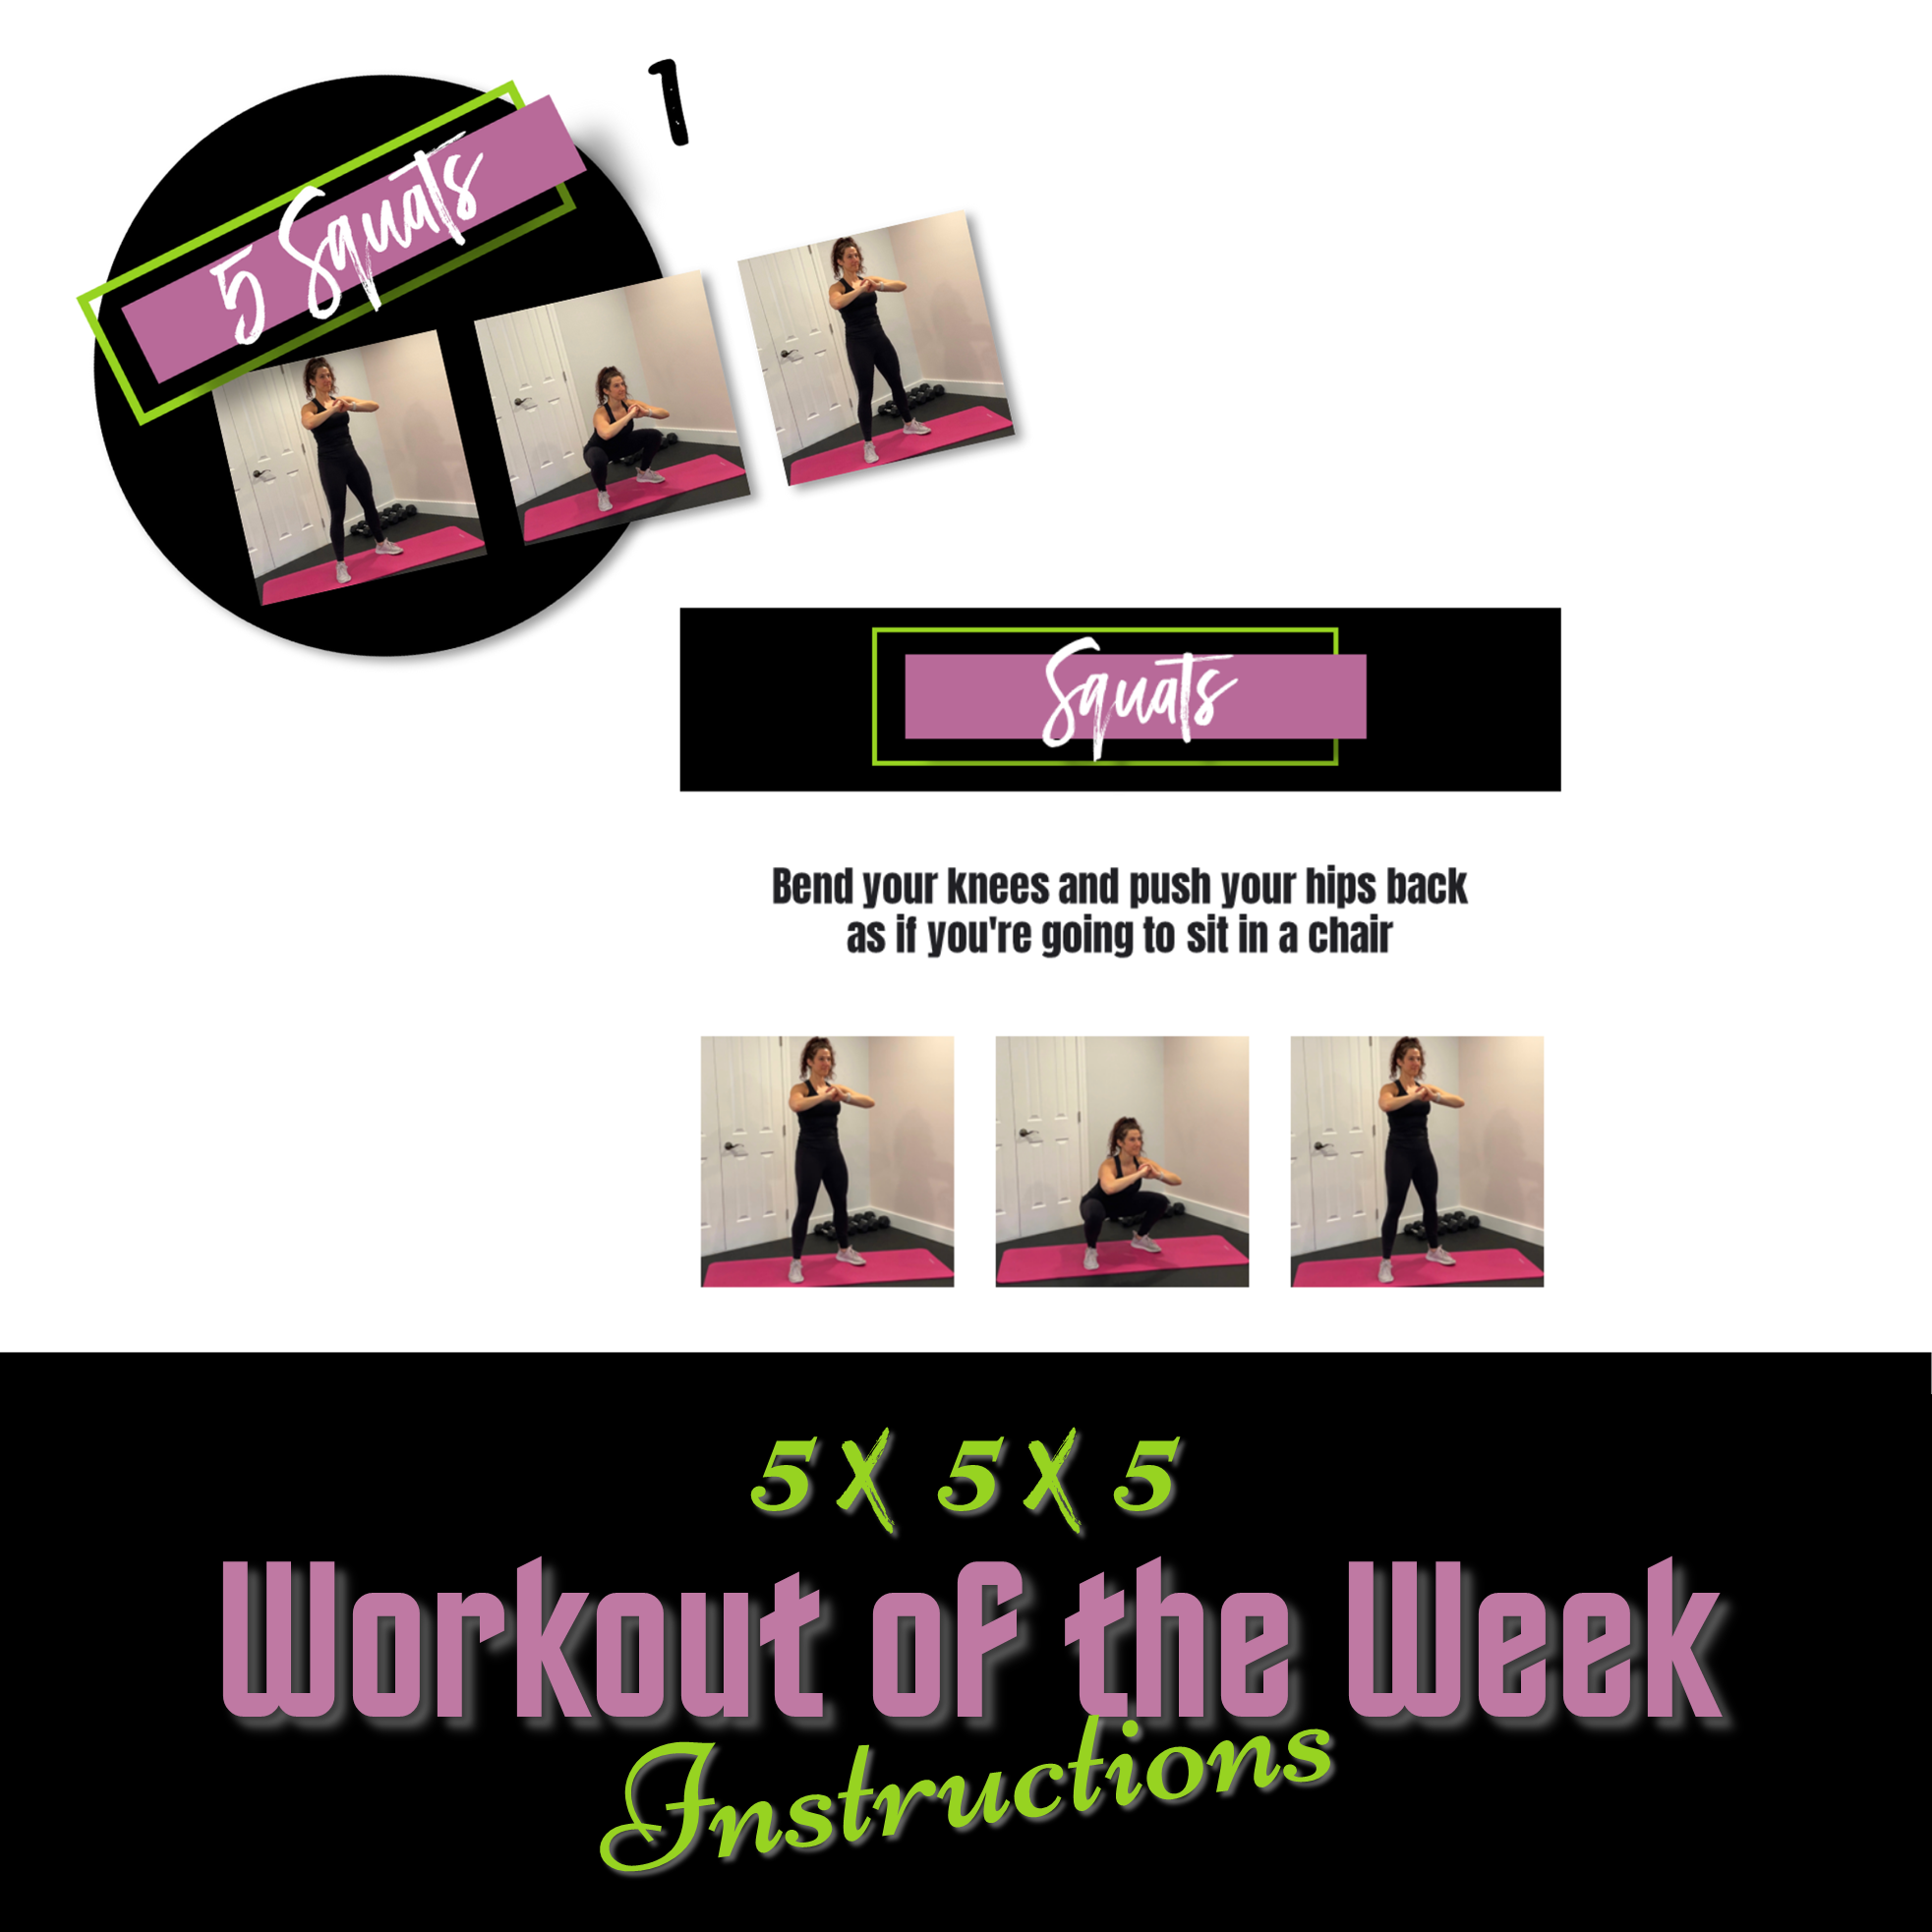 Workout of the week - 5 x 5 x 5 Printable Instructions